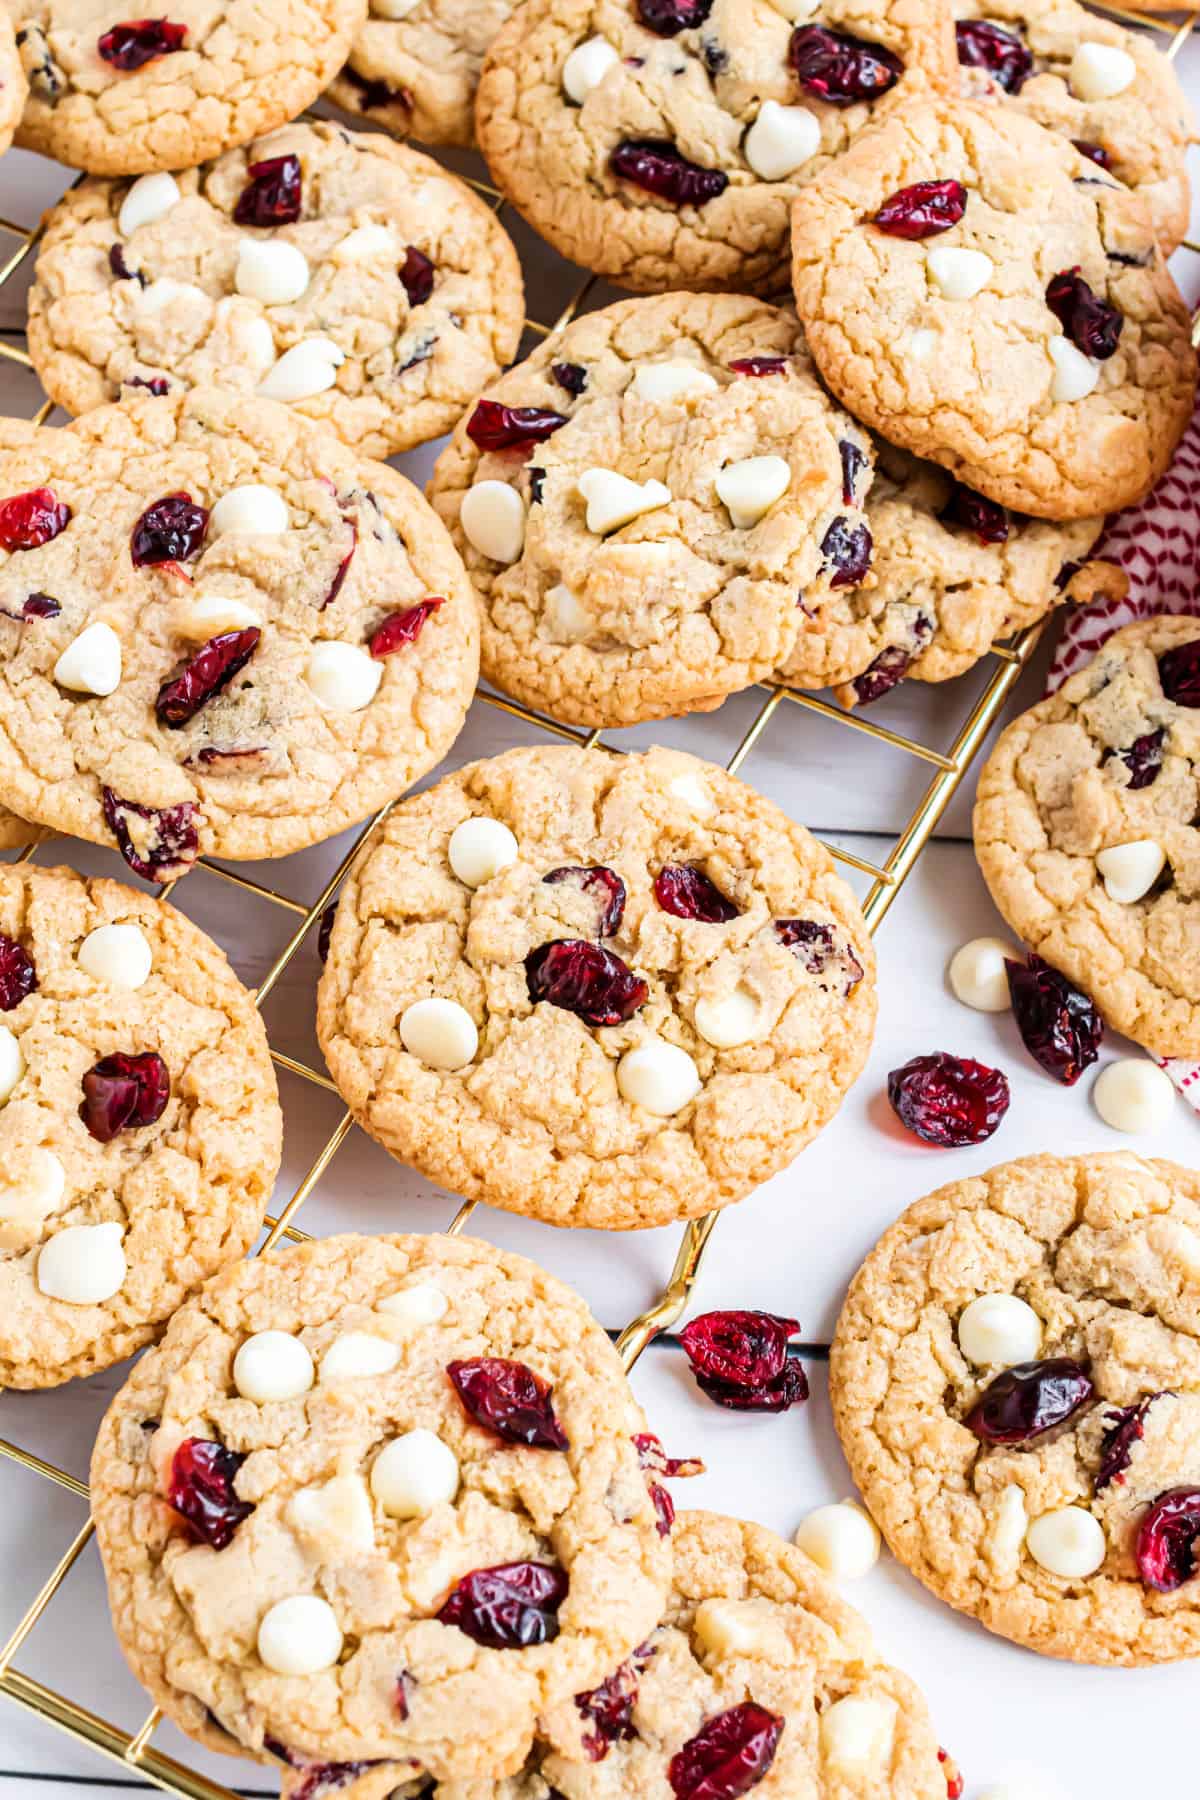 Cookies with white chocolate chips and craisins on a wire cooling rack.